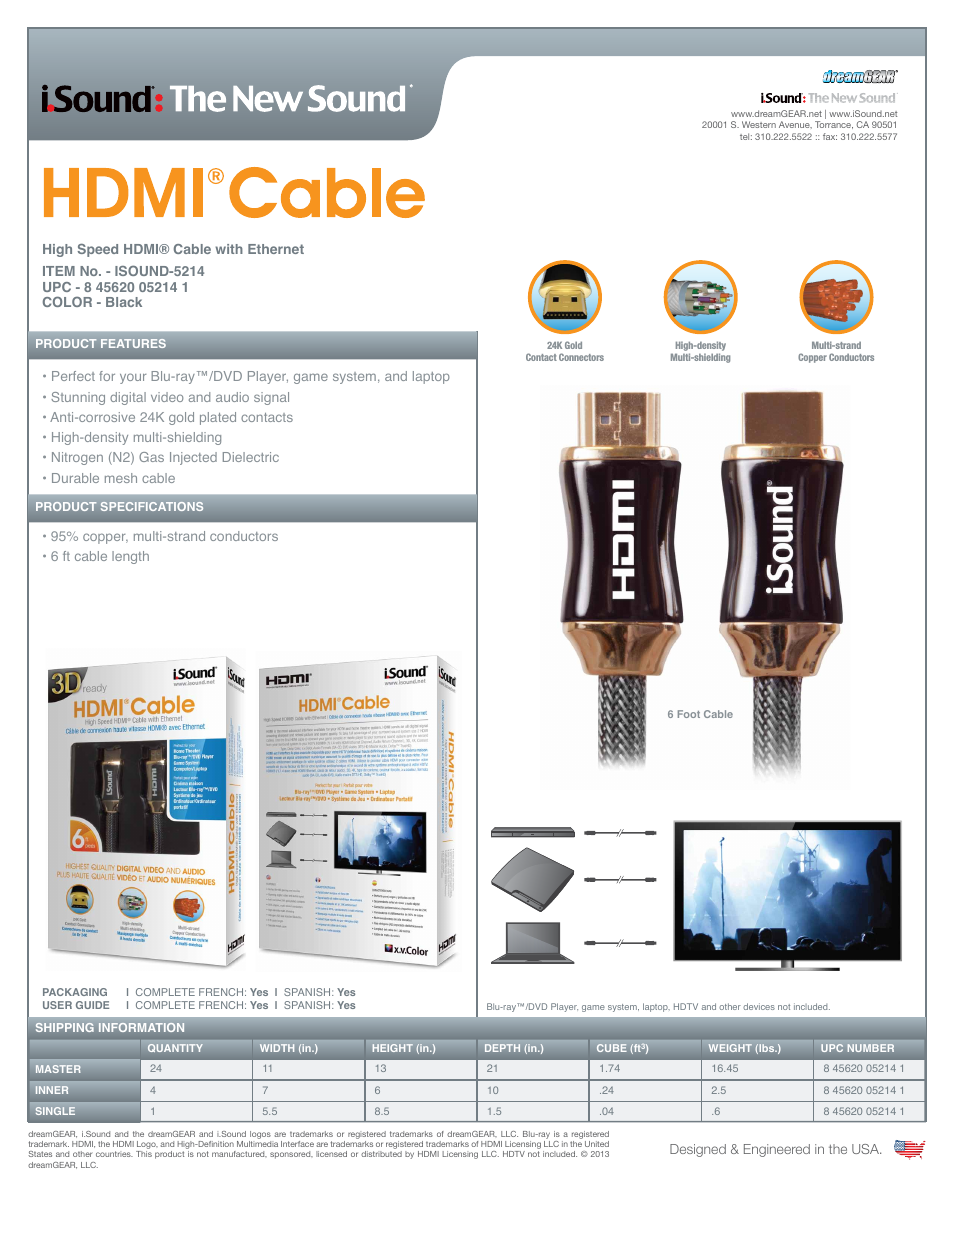 HDMI Cable - Sell Sheet